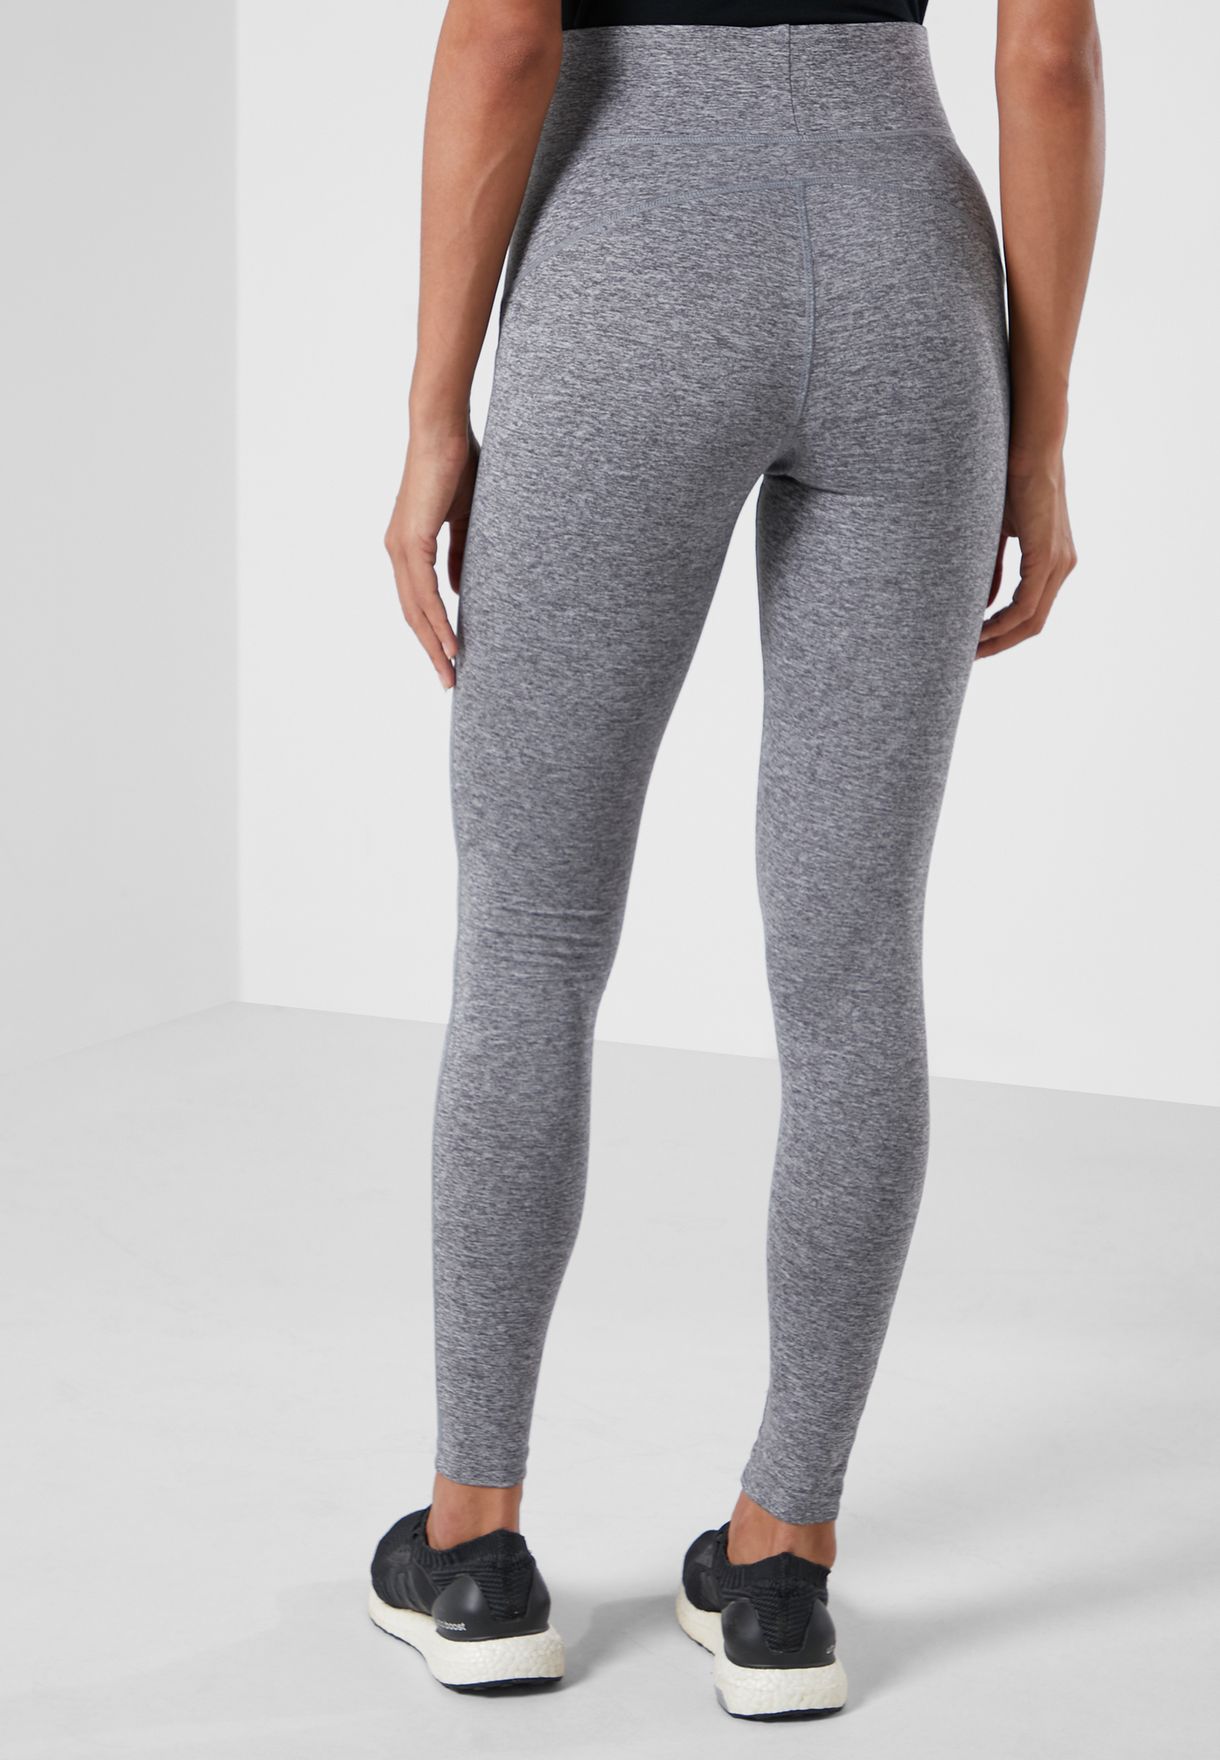 Buttery Smooth Basic Solid Extra Plus Size Leggings - 3X-5X - EEVEE